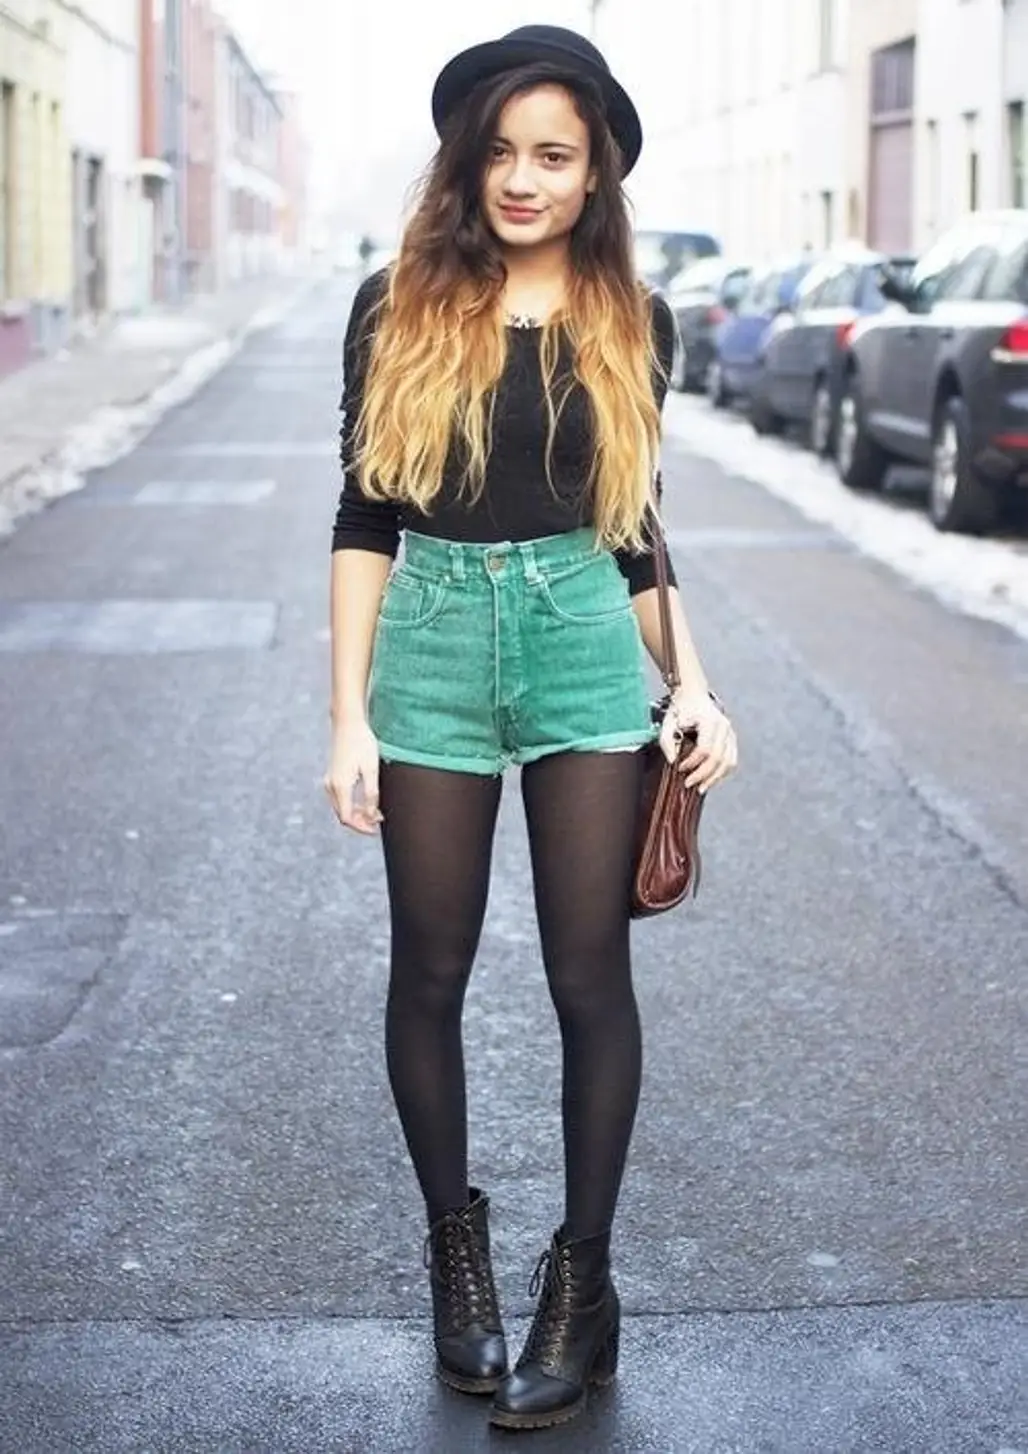 Black Tights with Black Denim Shorts Outfits (6 ideas & outfits)